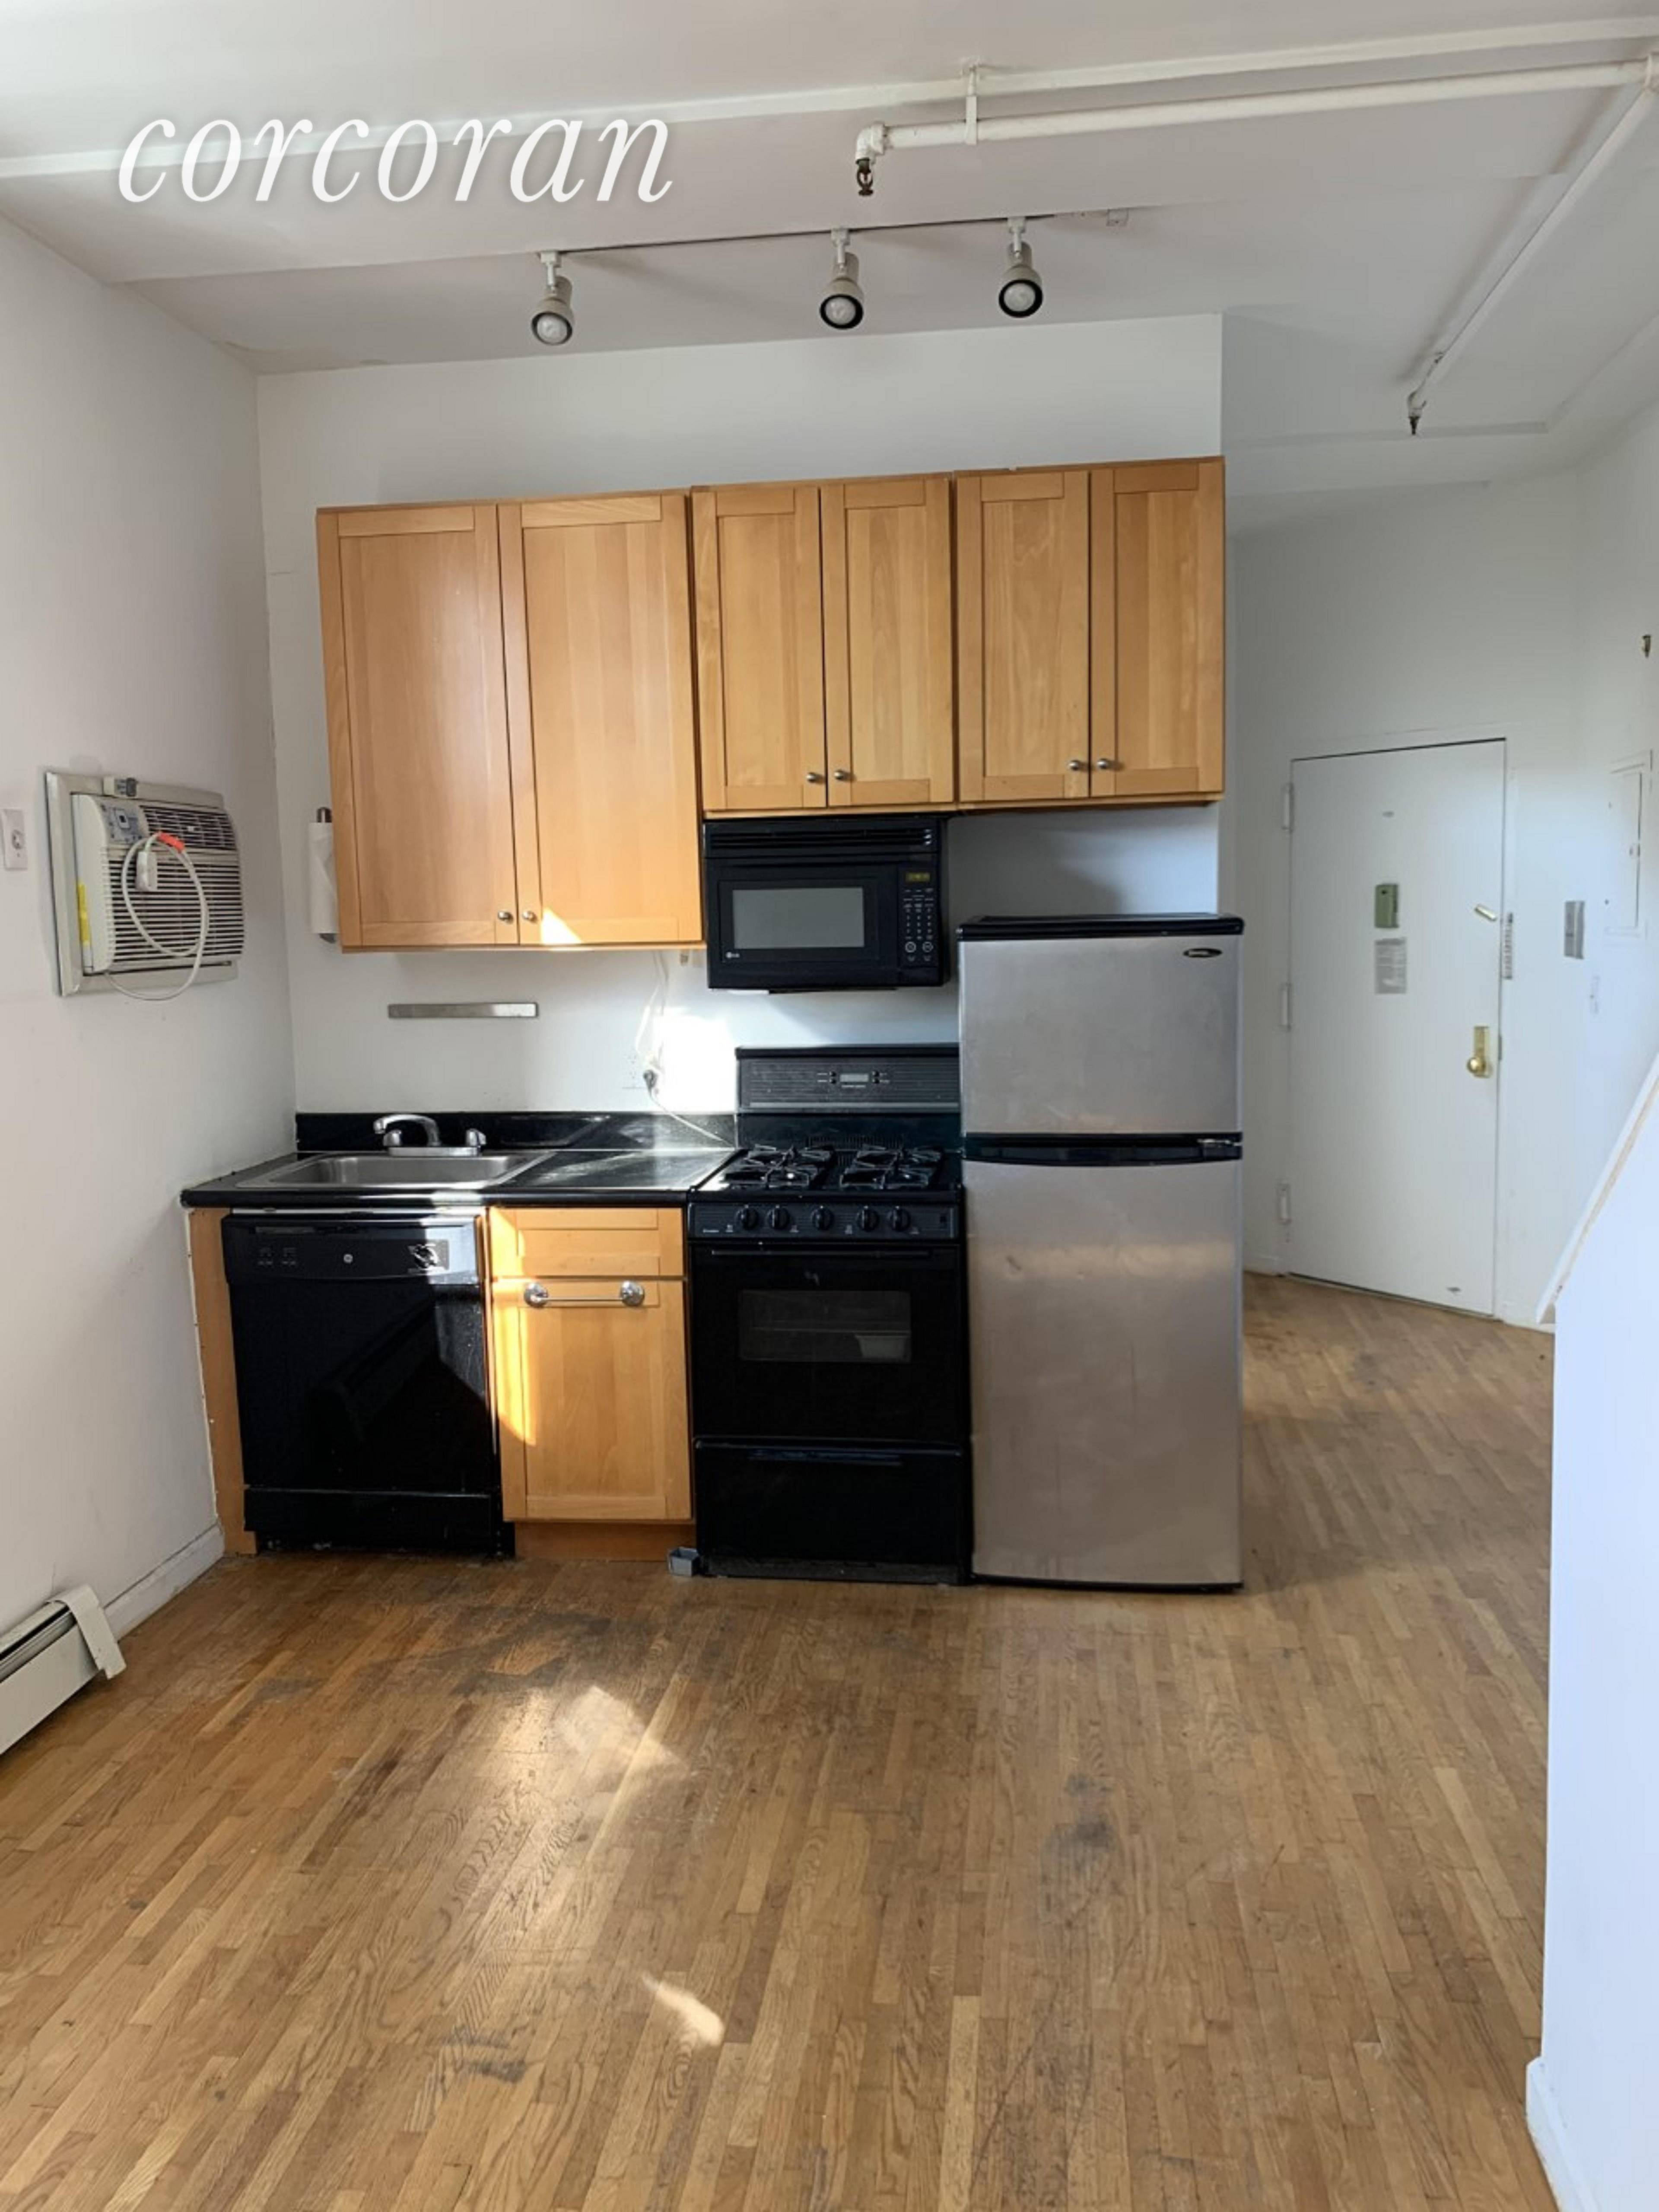 Renovated penthouse 2 bedroom 1 bath Duplex apartment with exclusive roof deck in one of South Harlem's premier locations.